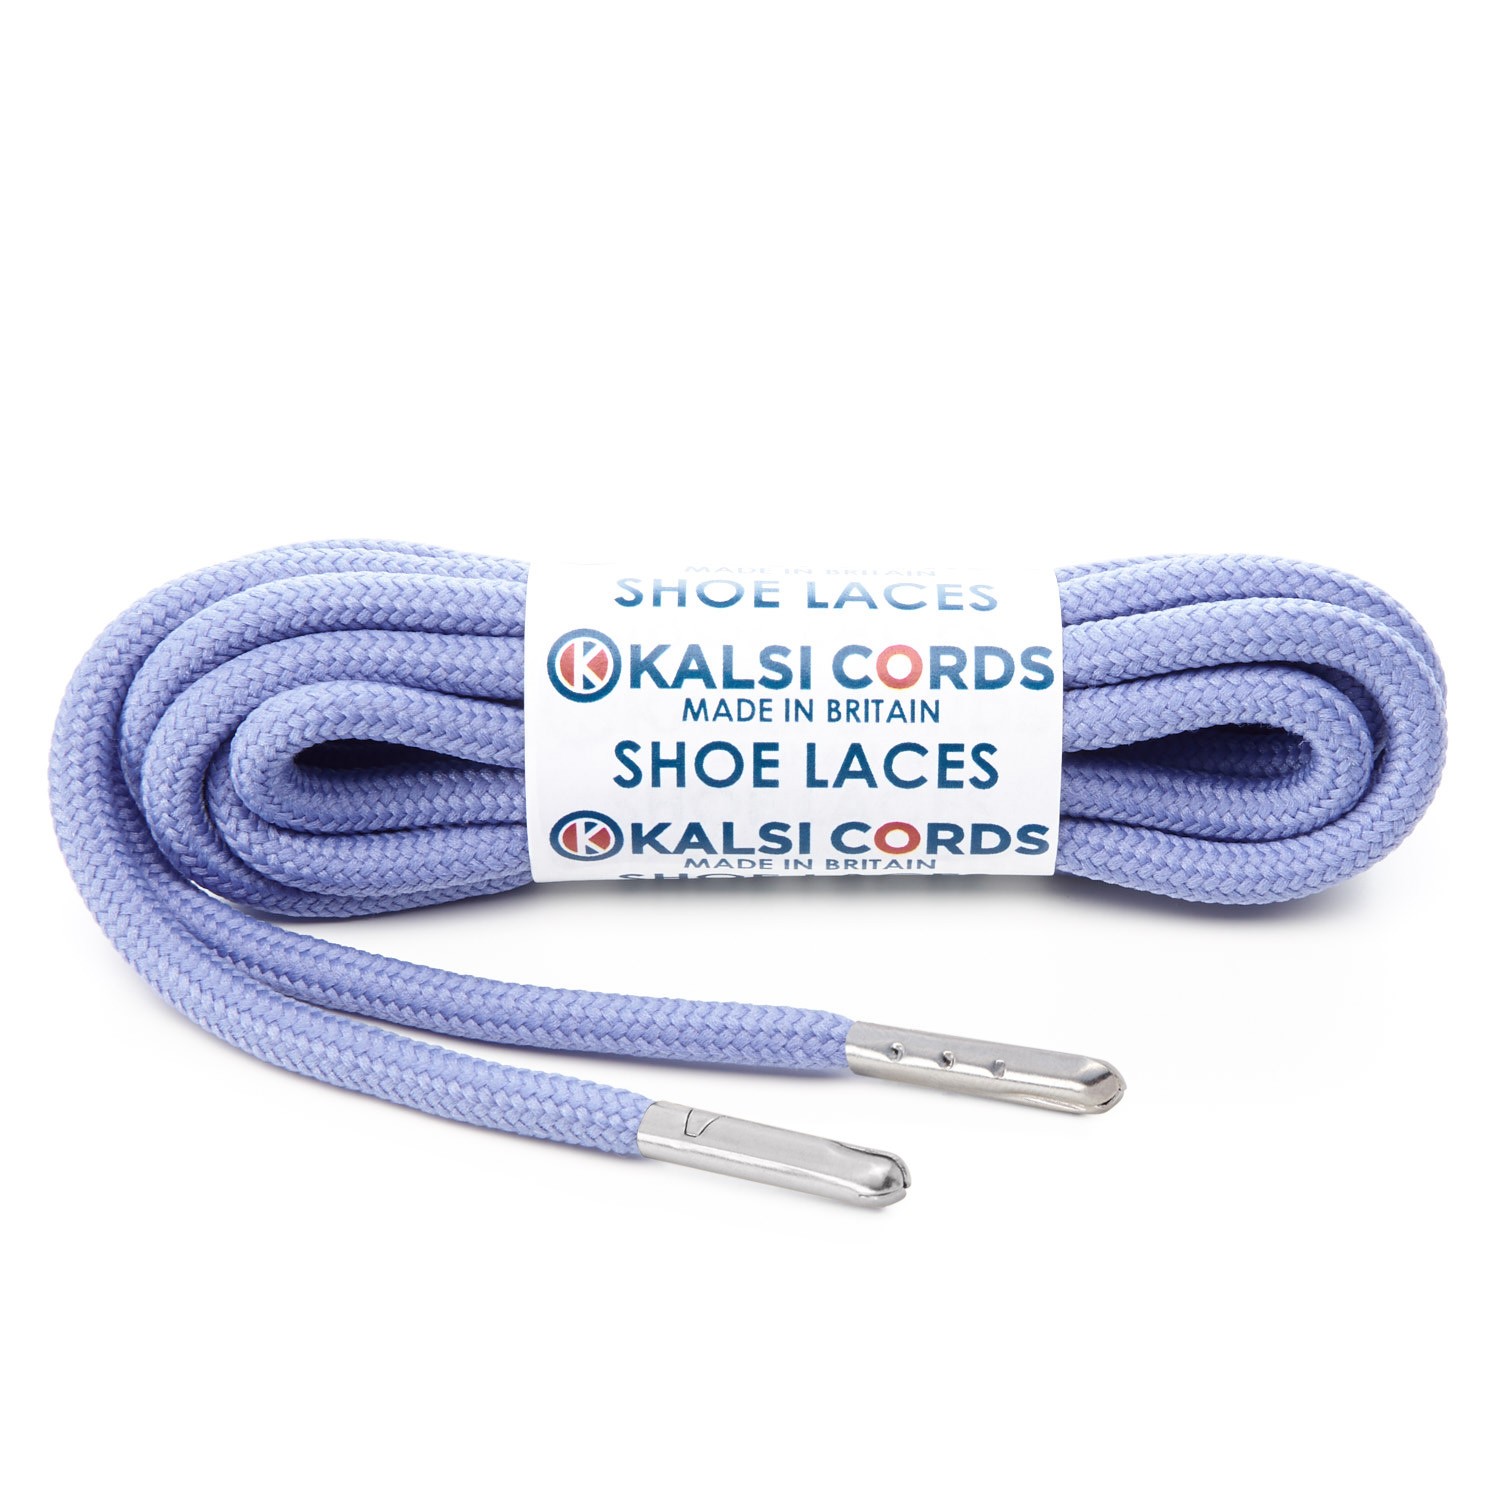 T621 5mm Round Polyester Shoe Laces Lilac 1 Silver Metal Tip Kalsi Cords